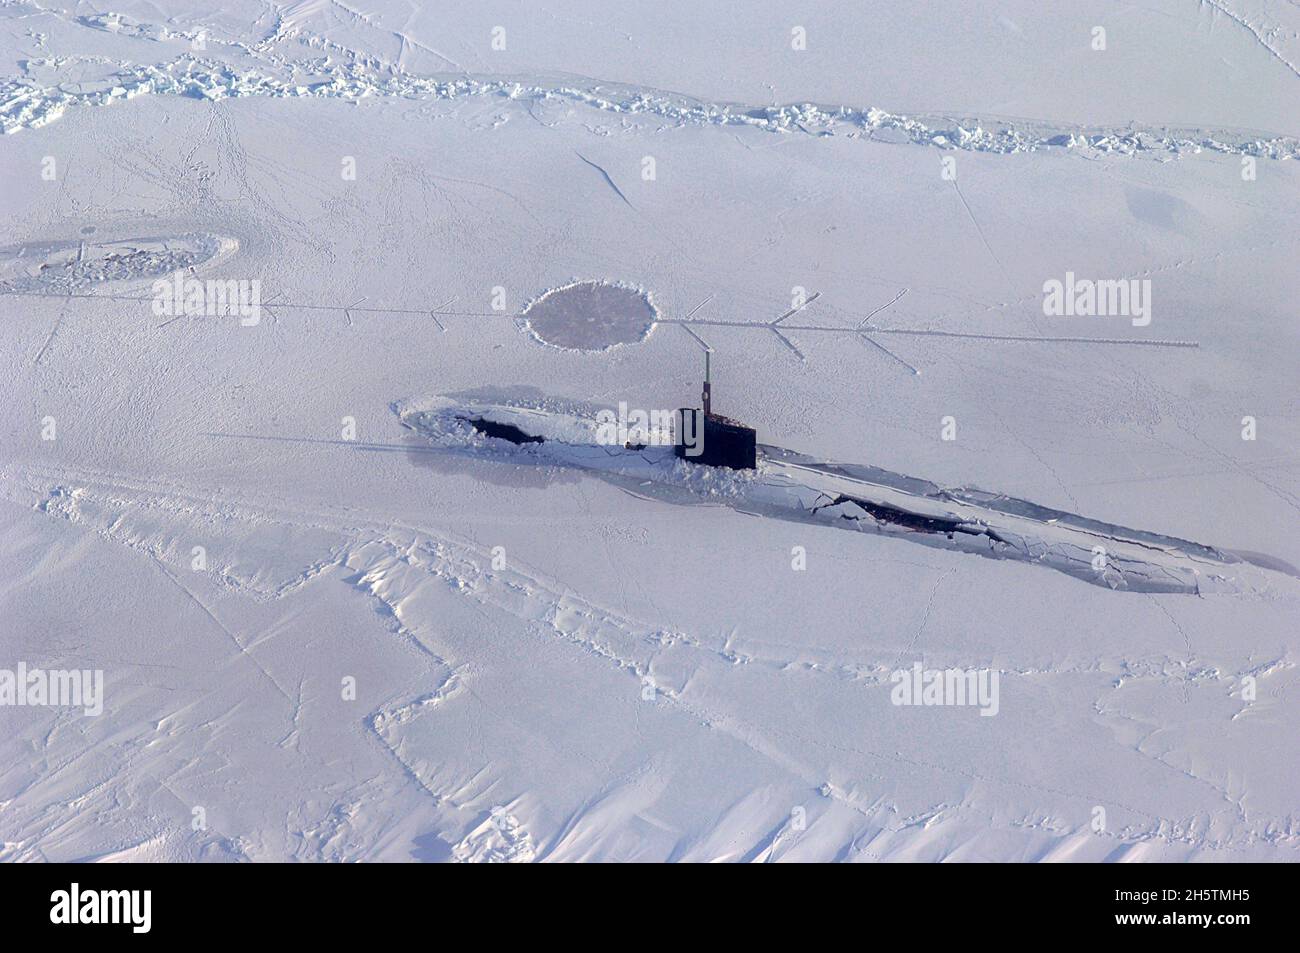 The U.S. Navy Los Angeles-class fast attack submarine USS Alexandria begins submerging after surfacing through two feet of ice during ICEX-07, a U.S. Navy and Royal Navy exercise conducted on and under a drifting ice floe March 18, 2007 about 180 nautical miles off the north coast of Alaska. Stock Photo